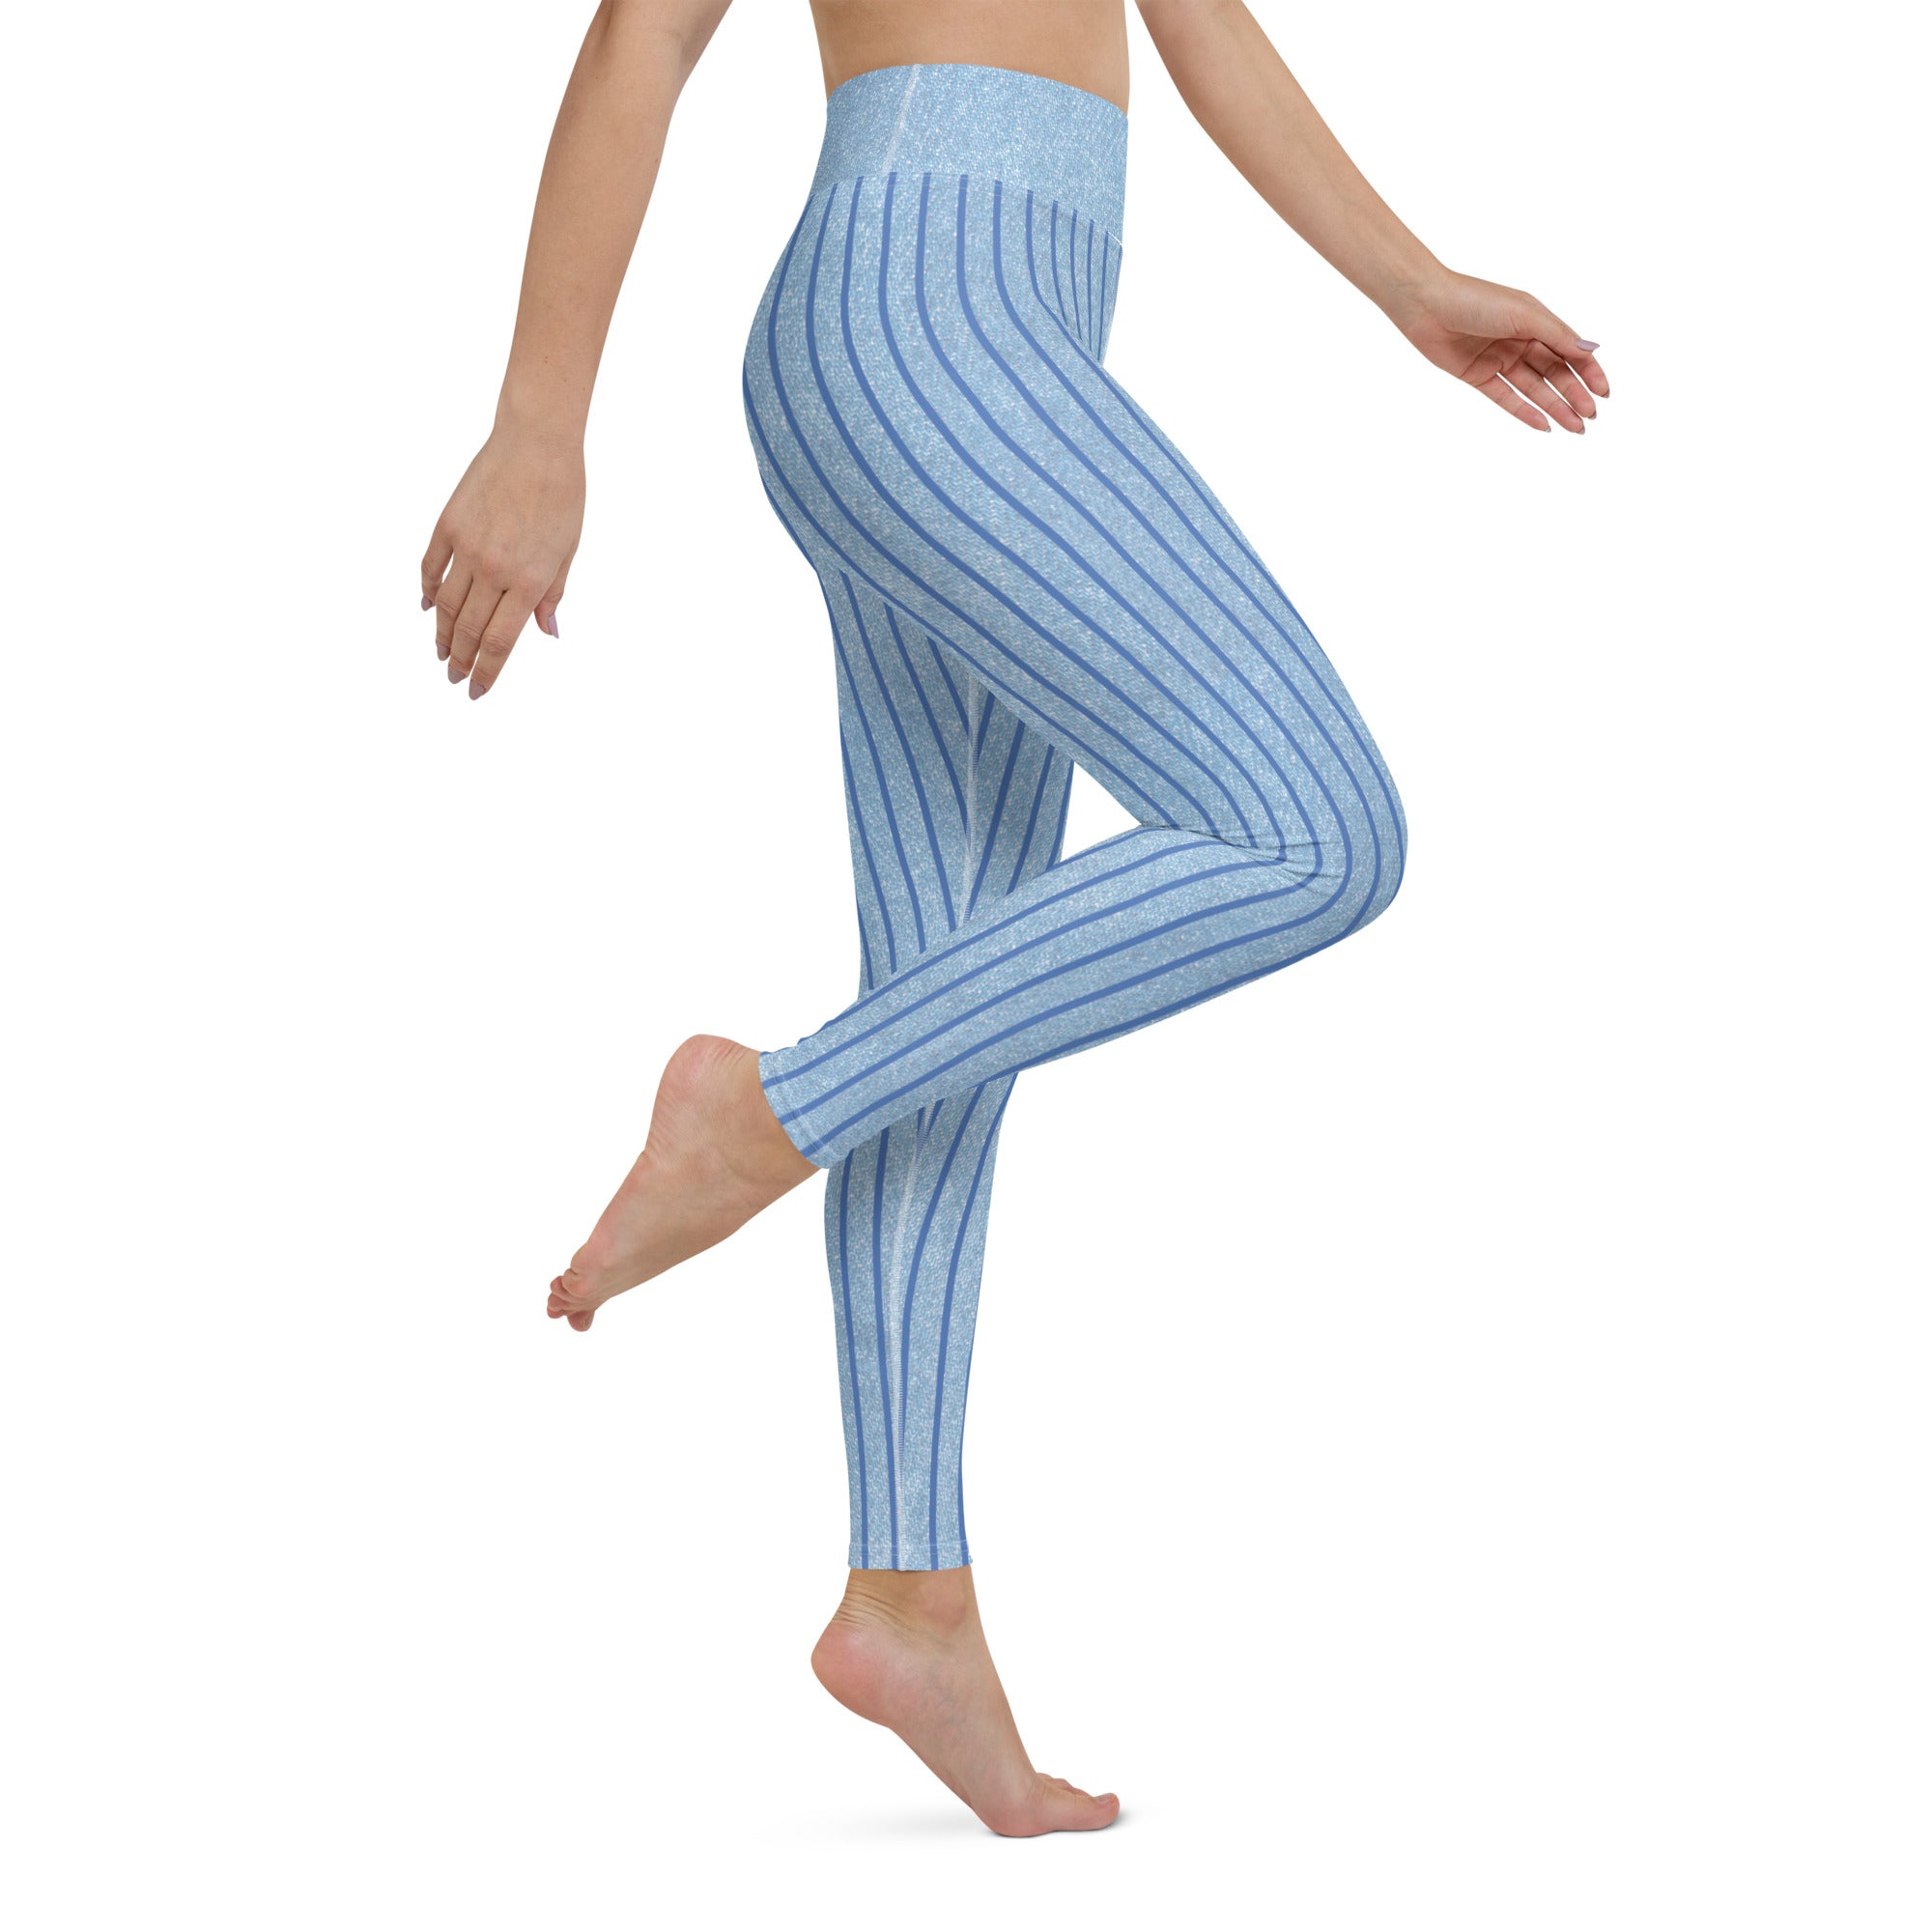 Flowing through yoga poses in Vintage Wash Yoga Leggings, exemplifying how vintage style meets yoga flexibility.